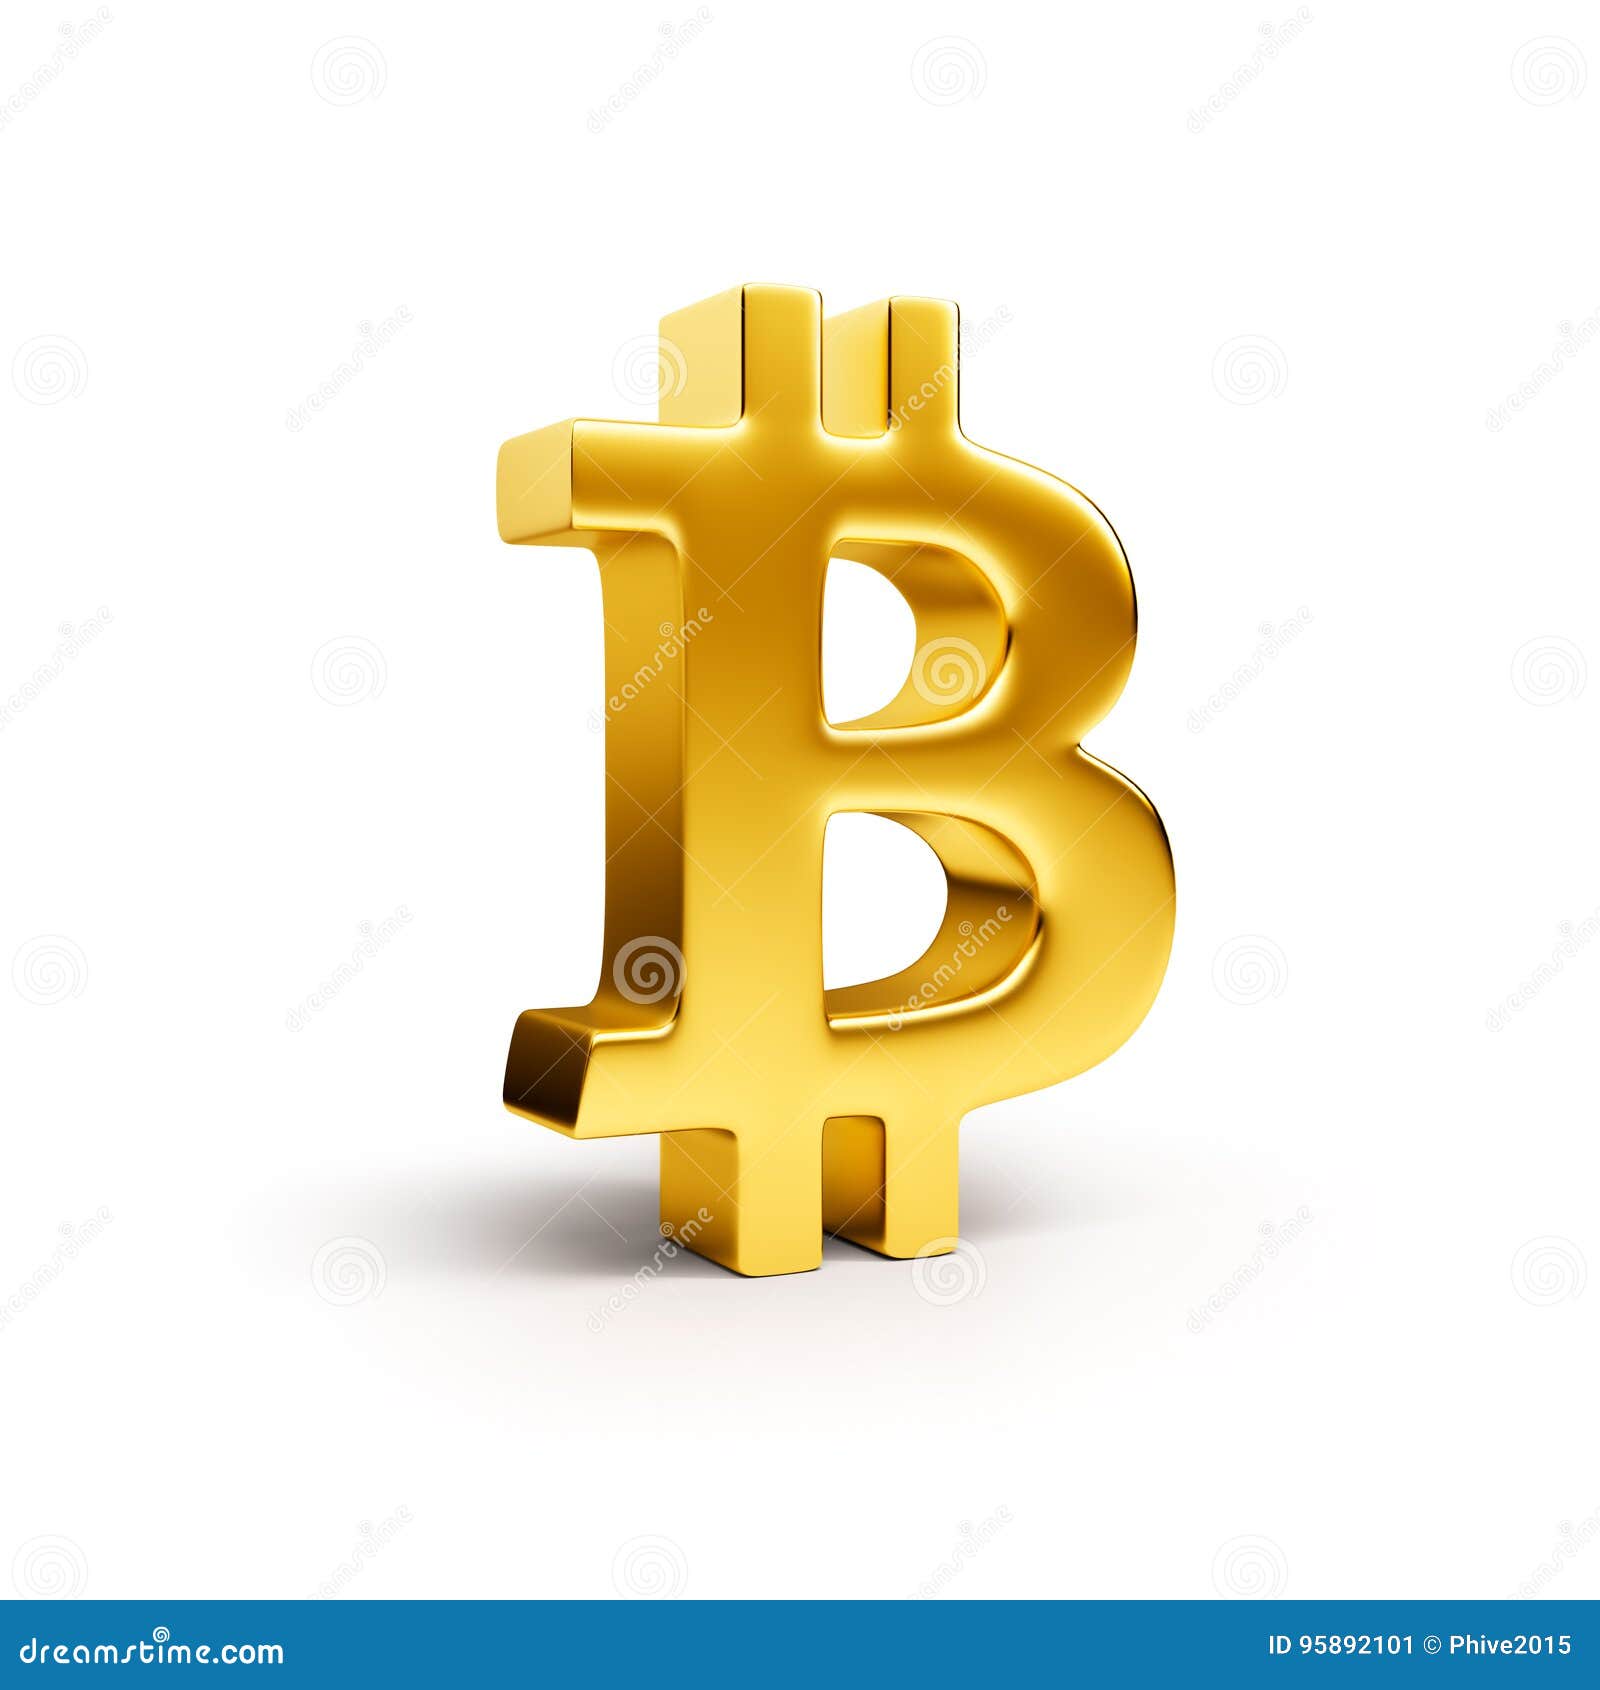 what is the stock symbol for bitcoin